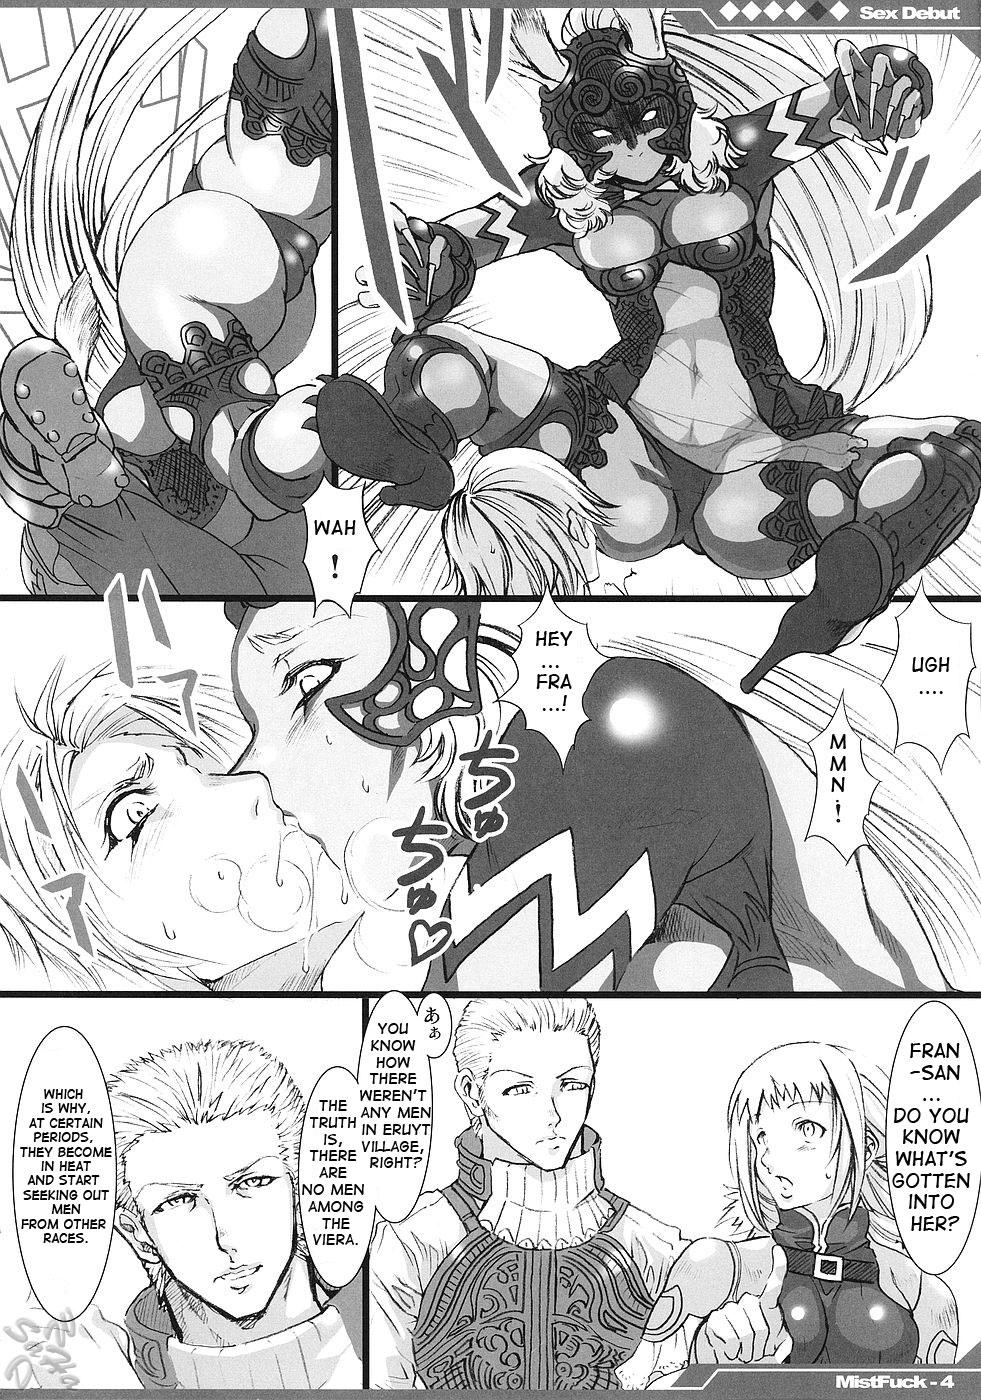 Heels Kyou Kara Fuuzoku Debut | Today's the Debut of Sex Service - Final fantasy xii Bisexual - Page 5